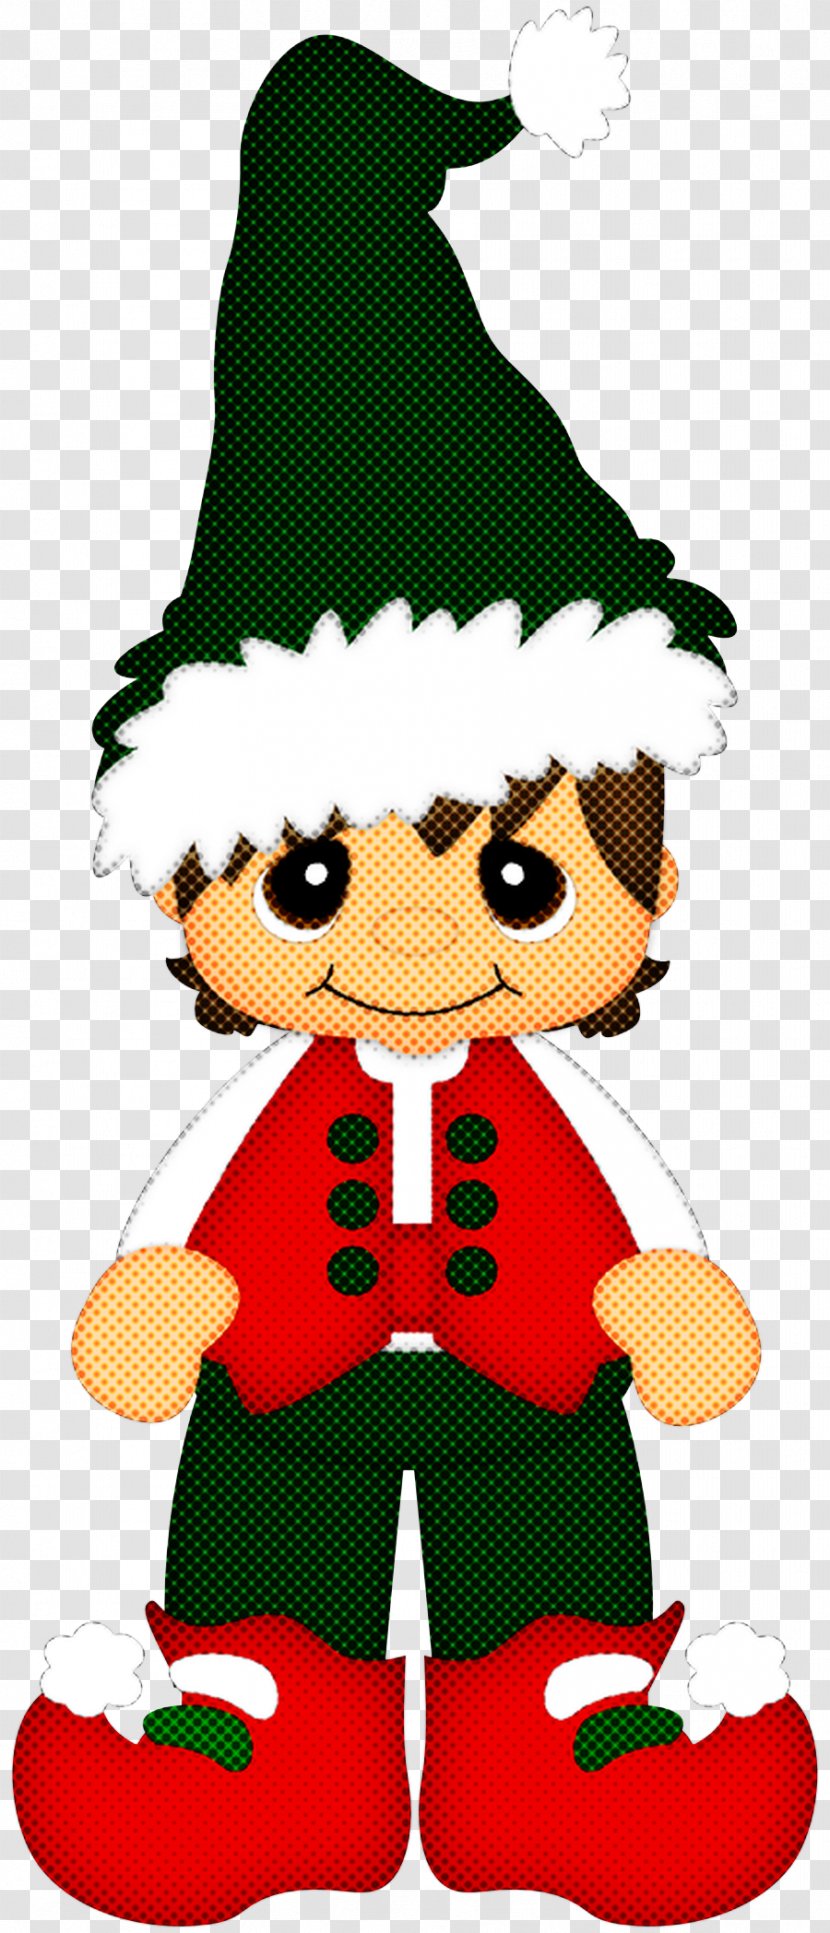 Christmas Elf - Pleased Transparent PNG